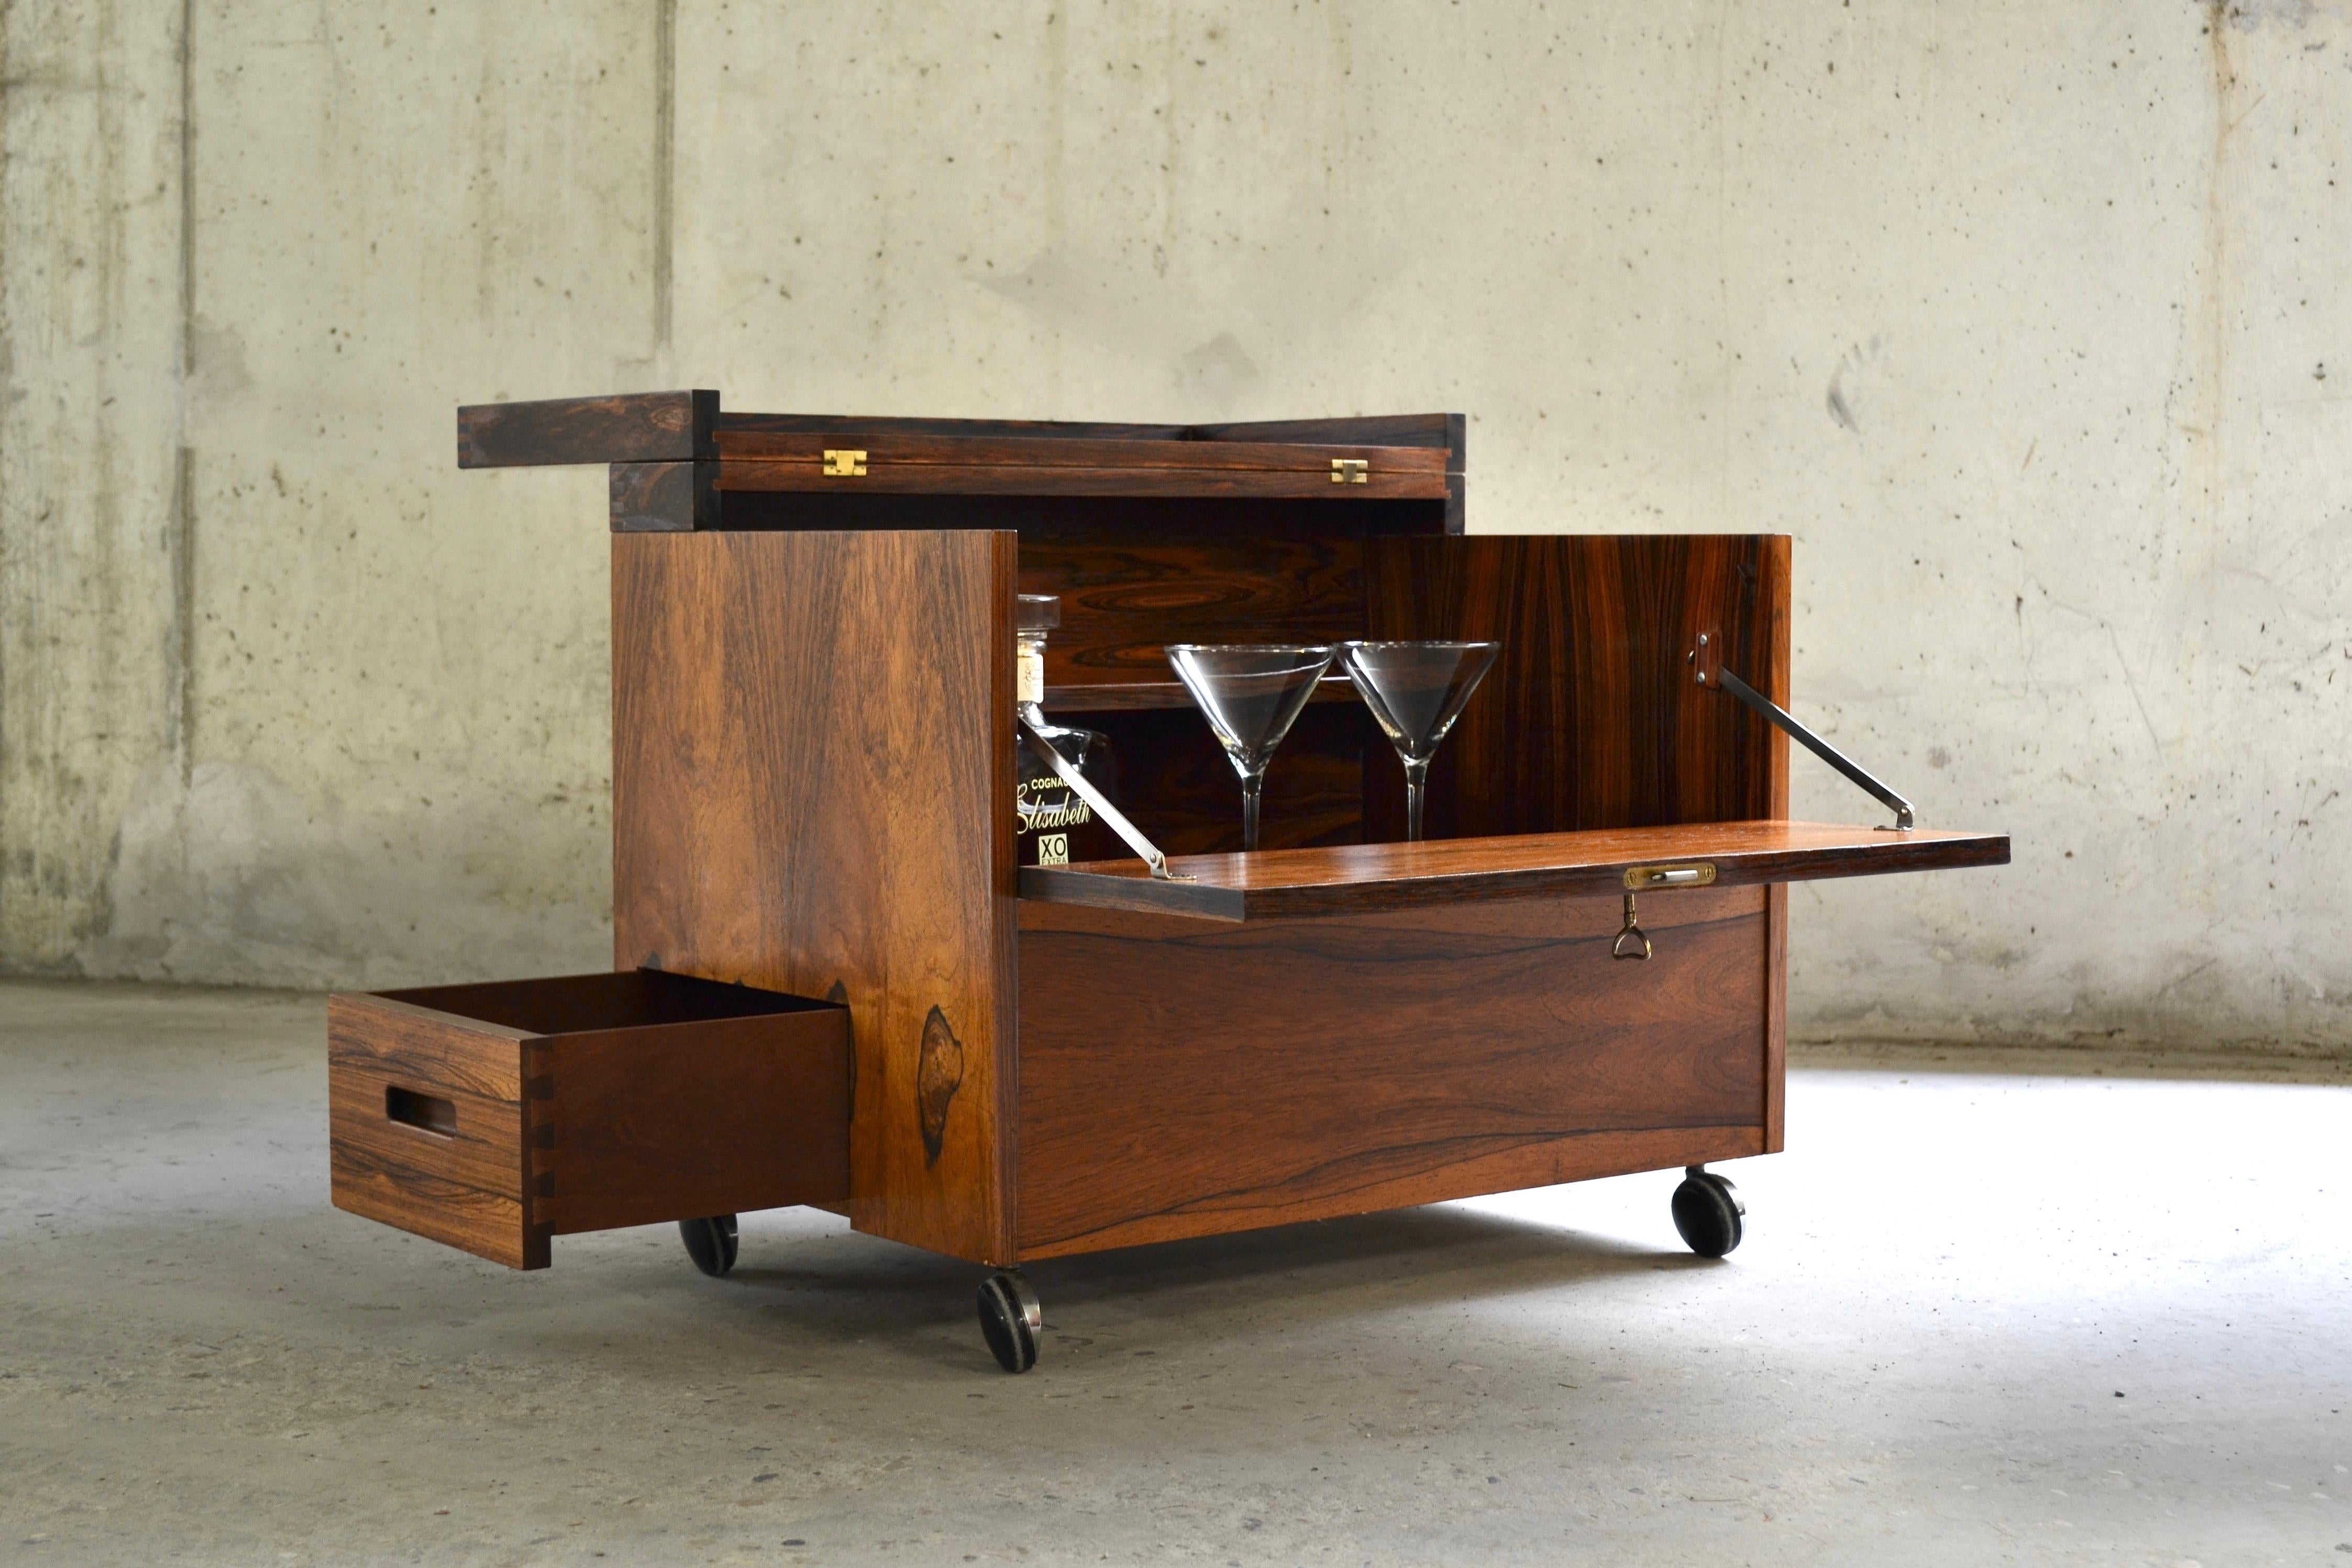 Designed between the end of the 60s and the beginning of the 70s by the designer Torbjørn Afdal, this rosewood case reveals all its splendor when, once its little key is turned, it becomes possible to transform it into a delicate, ingeniously